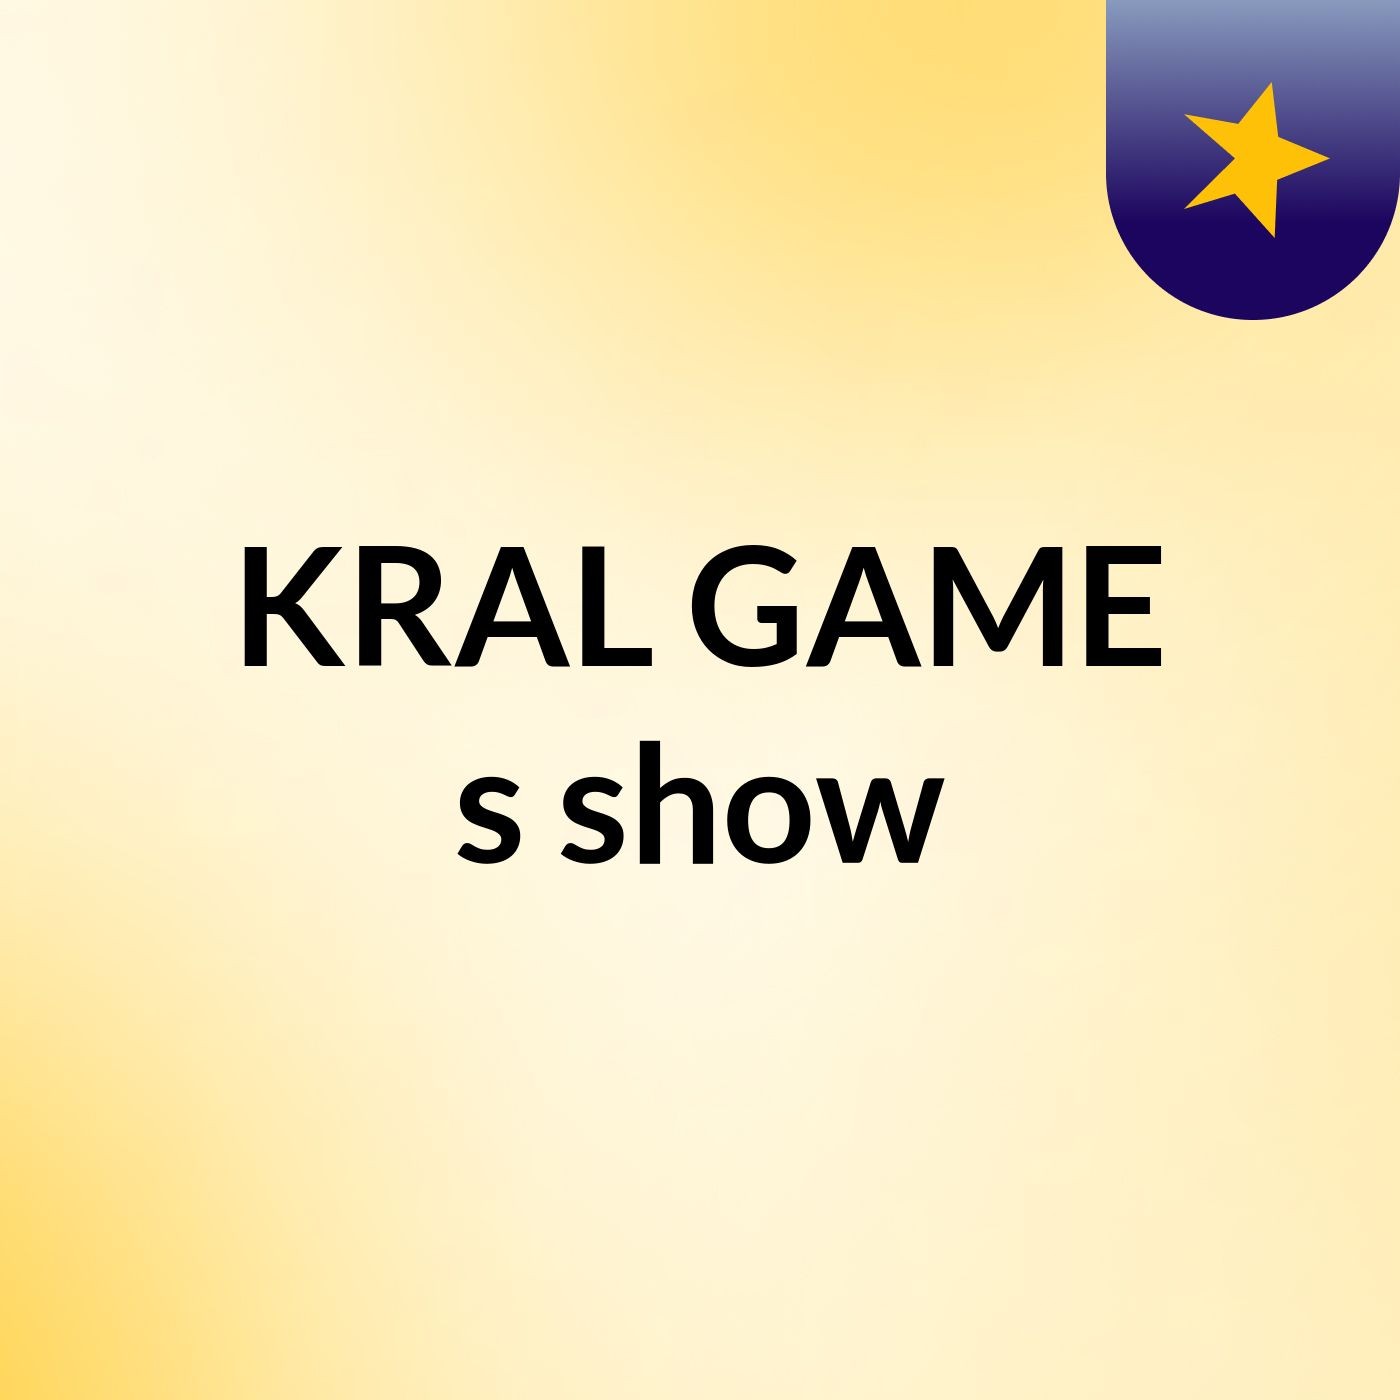 KRAL GAME's show